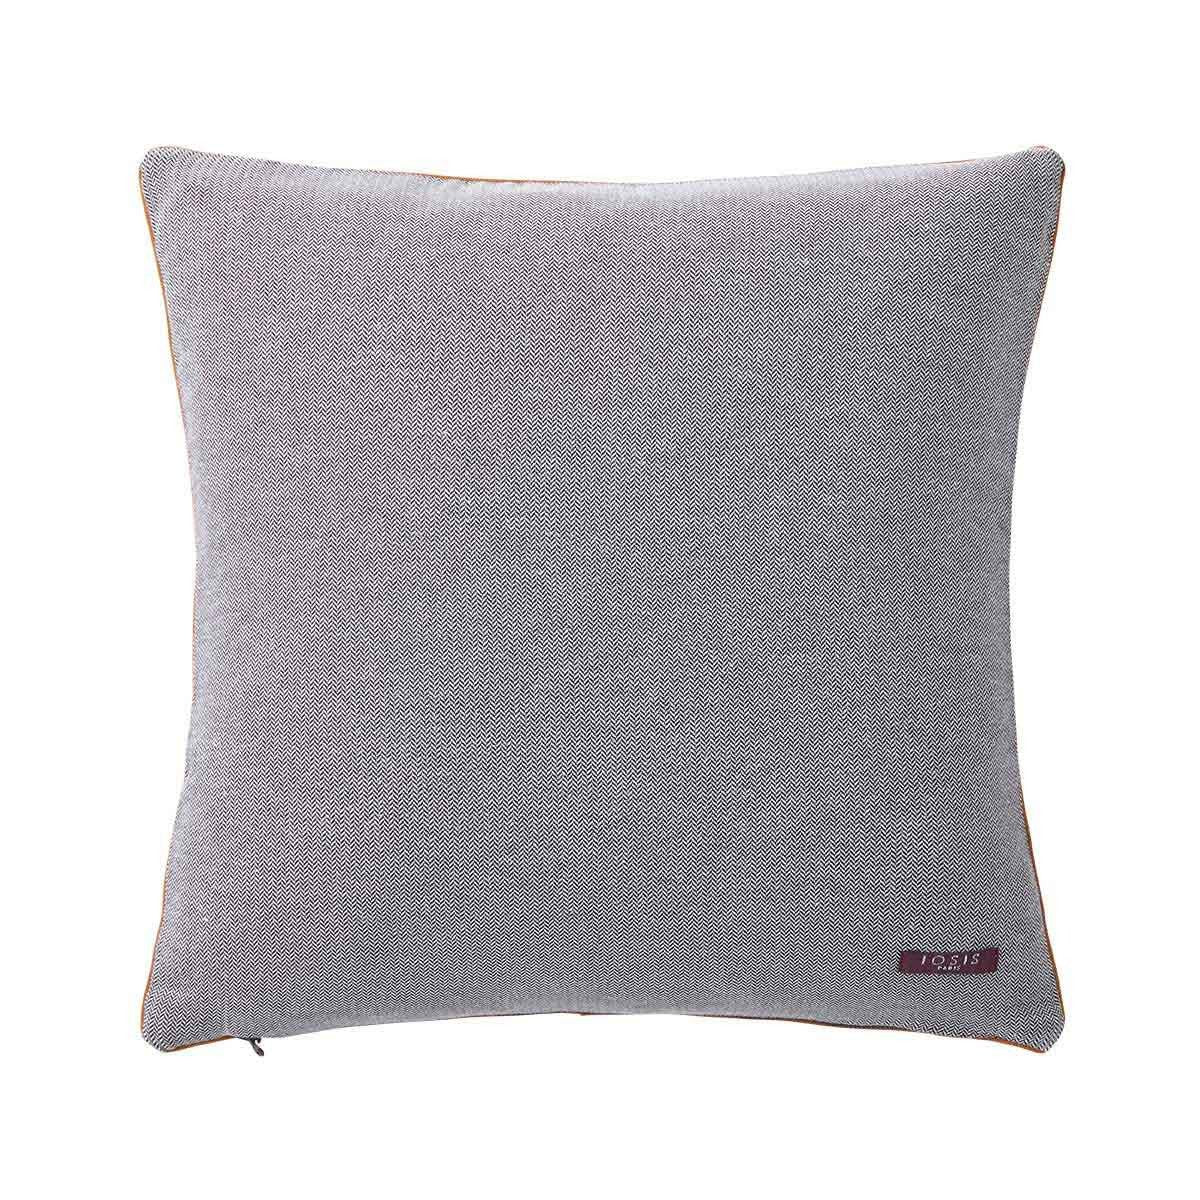 Fig Linens - Cigales Peche Decorative Pillow by Iosis - Back 